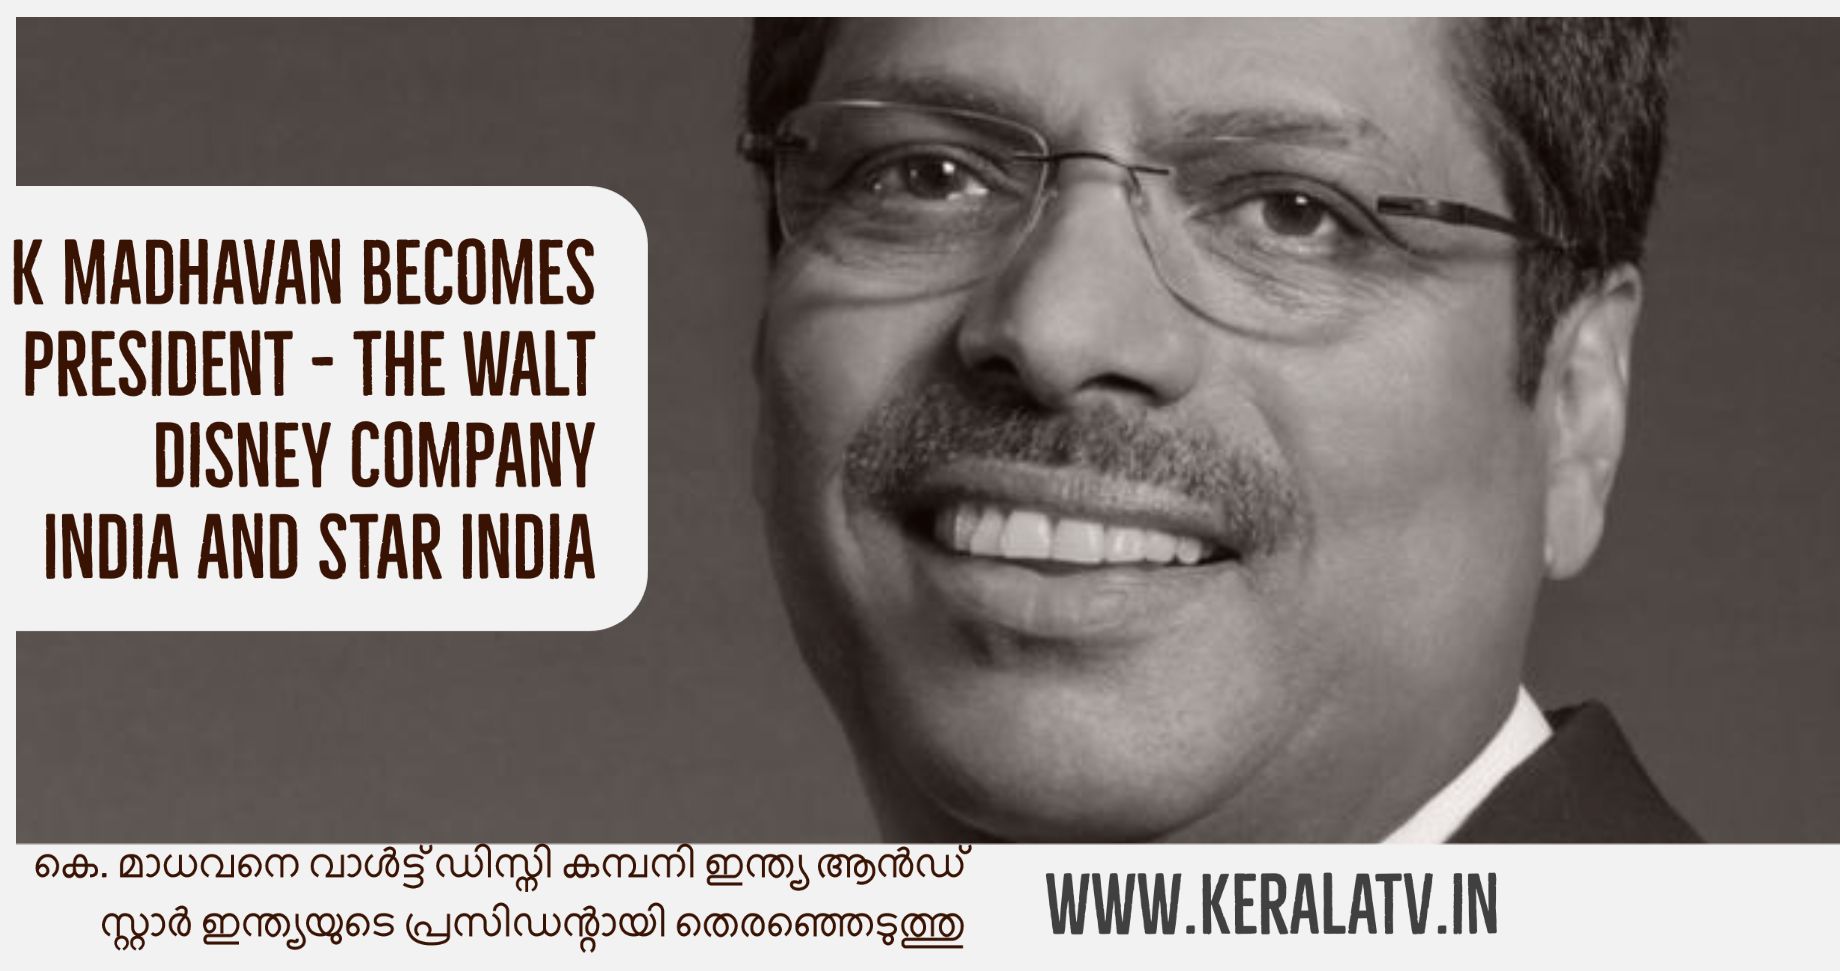 K Madhavan Becomes President - The Walt Disney Company India and Star India